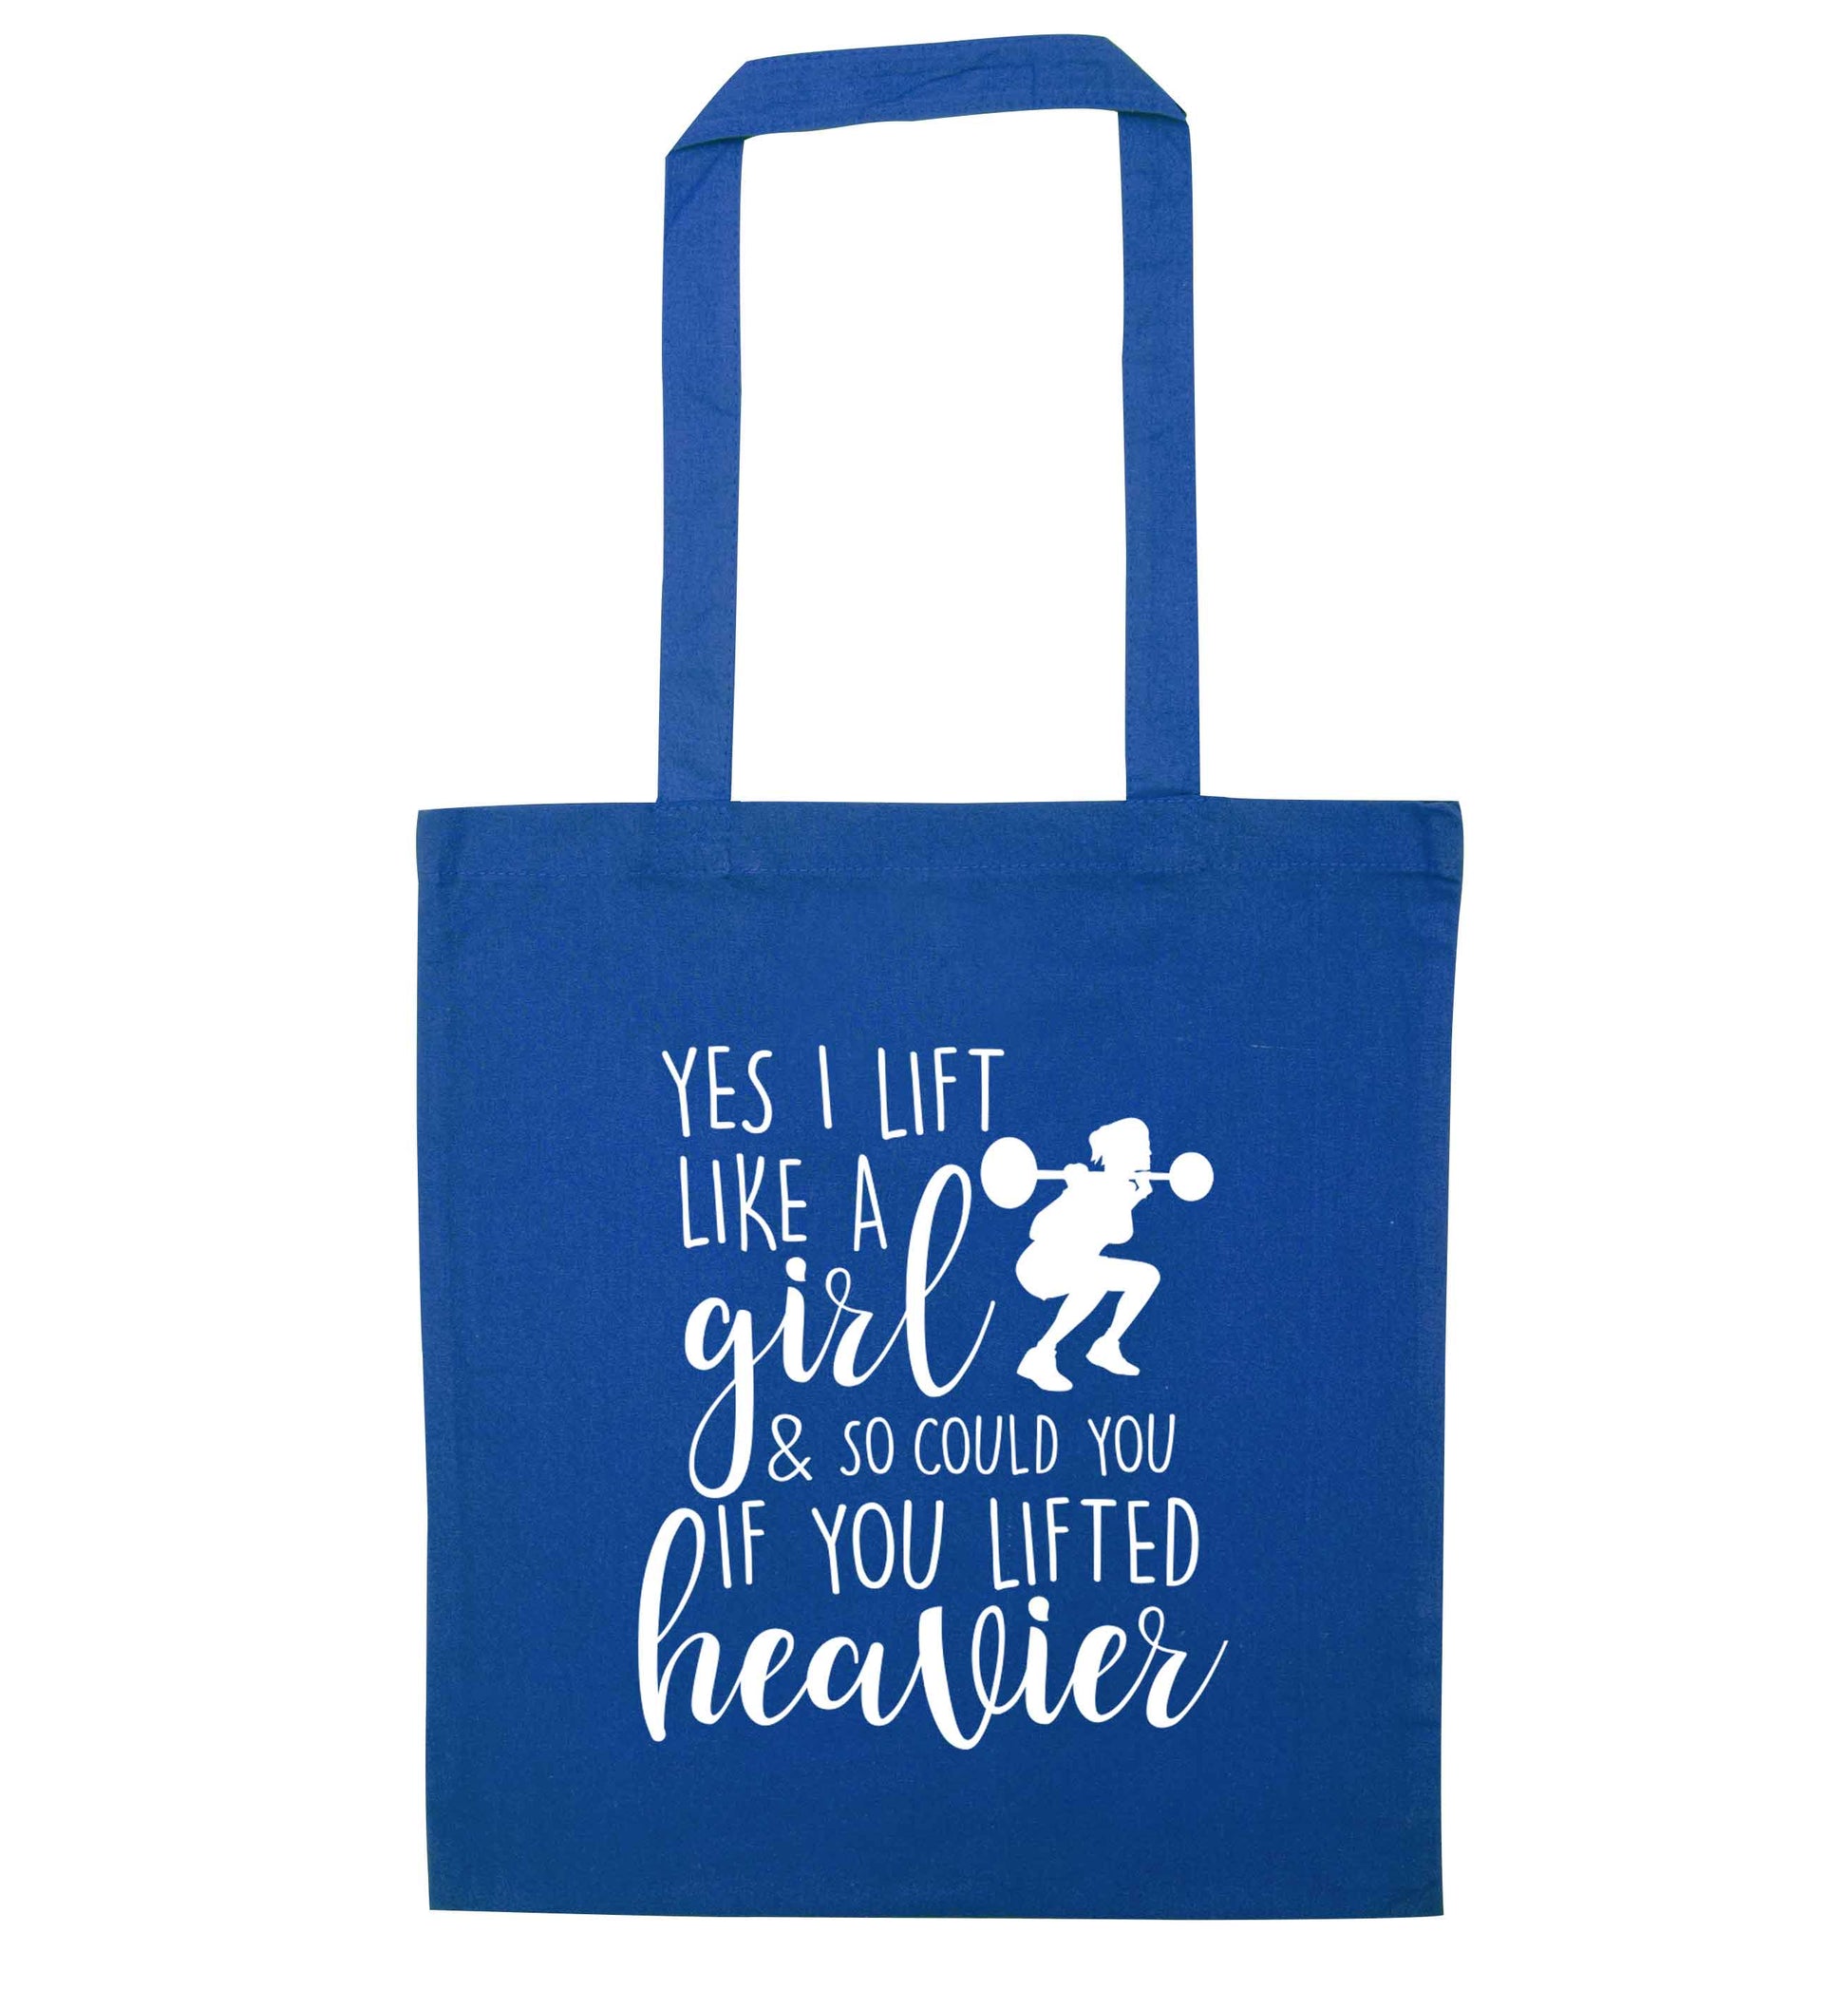 Yes I lift like a girl and so could you if you lifted heavier blue tote bag